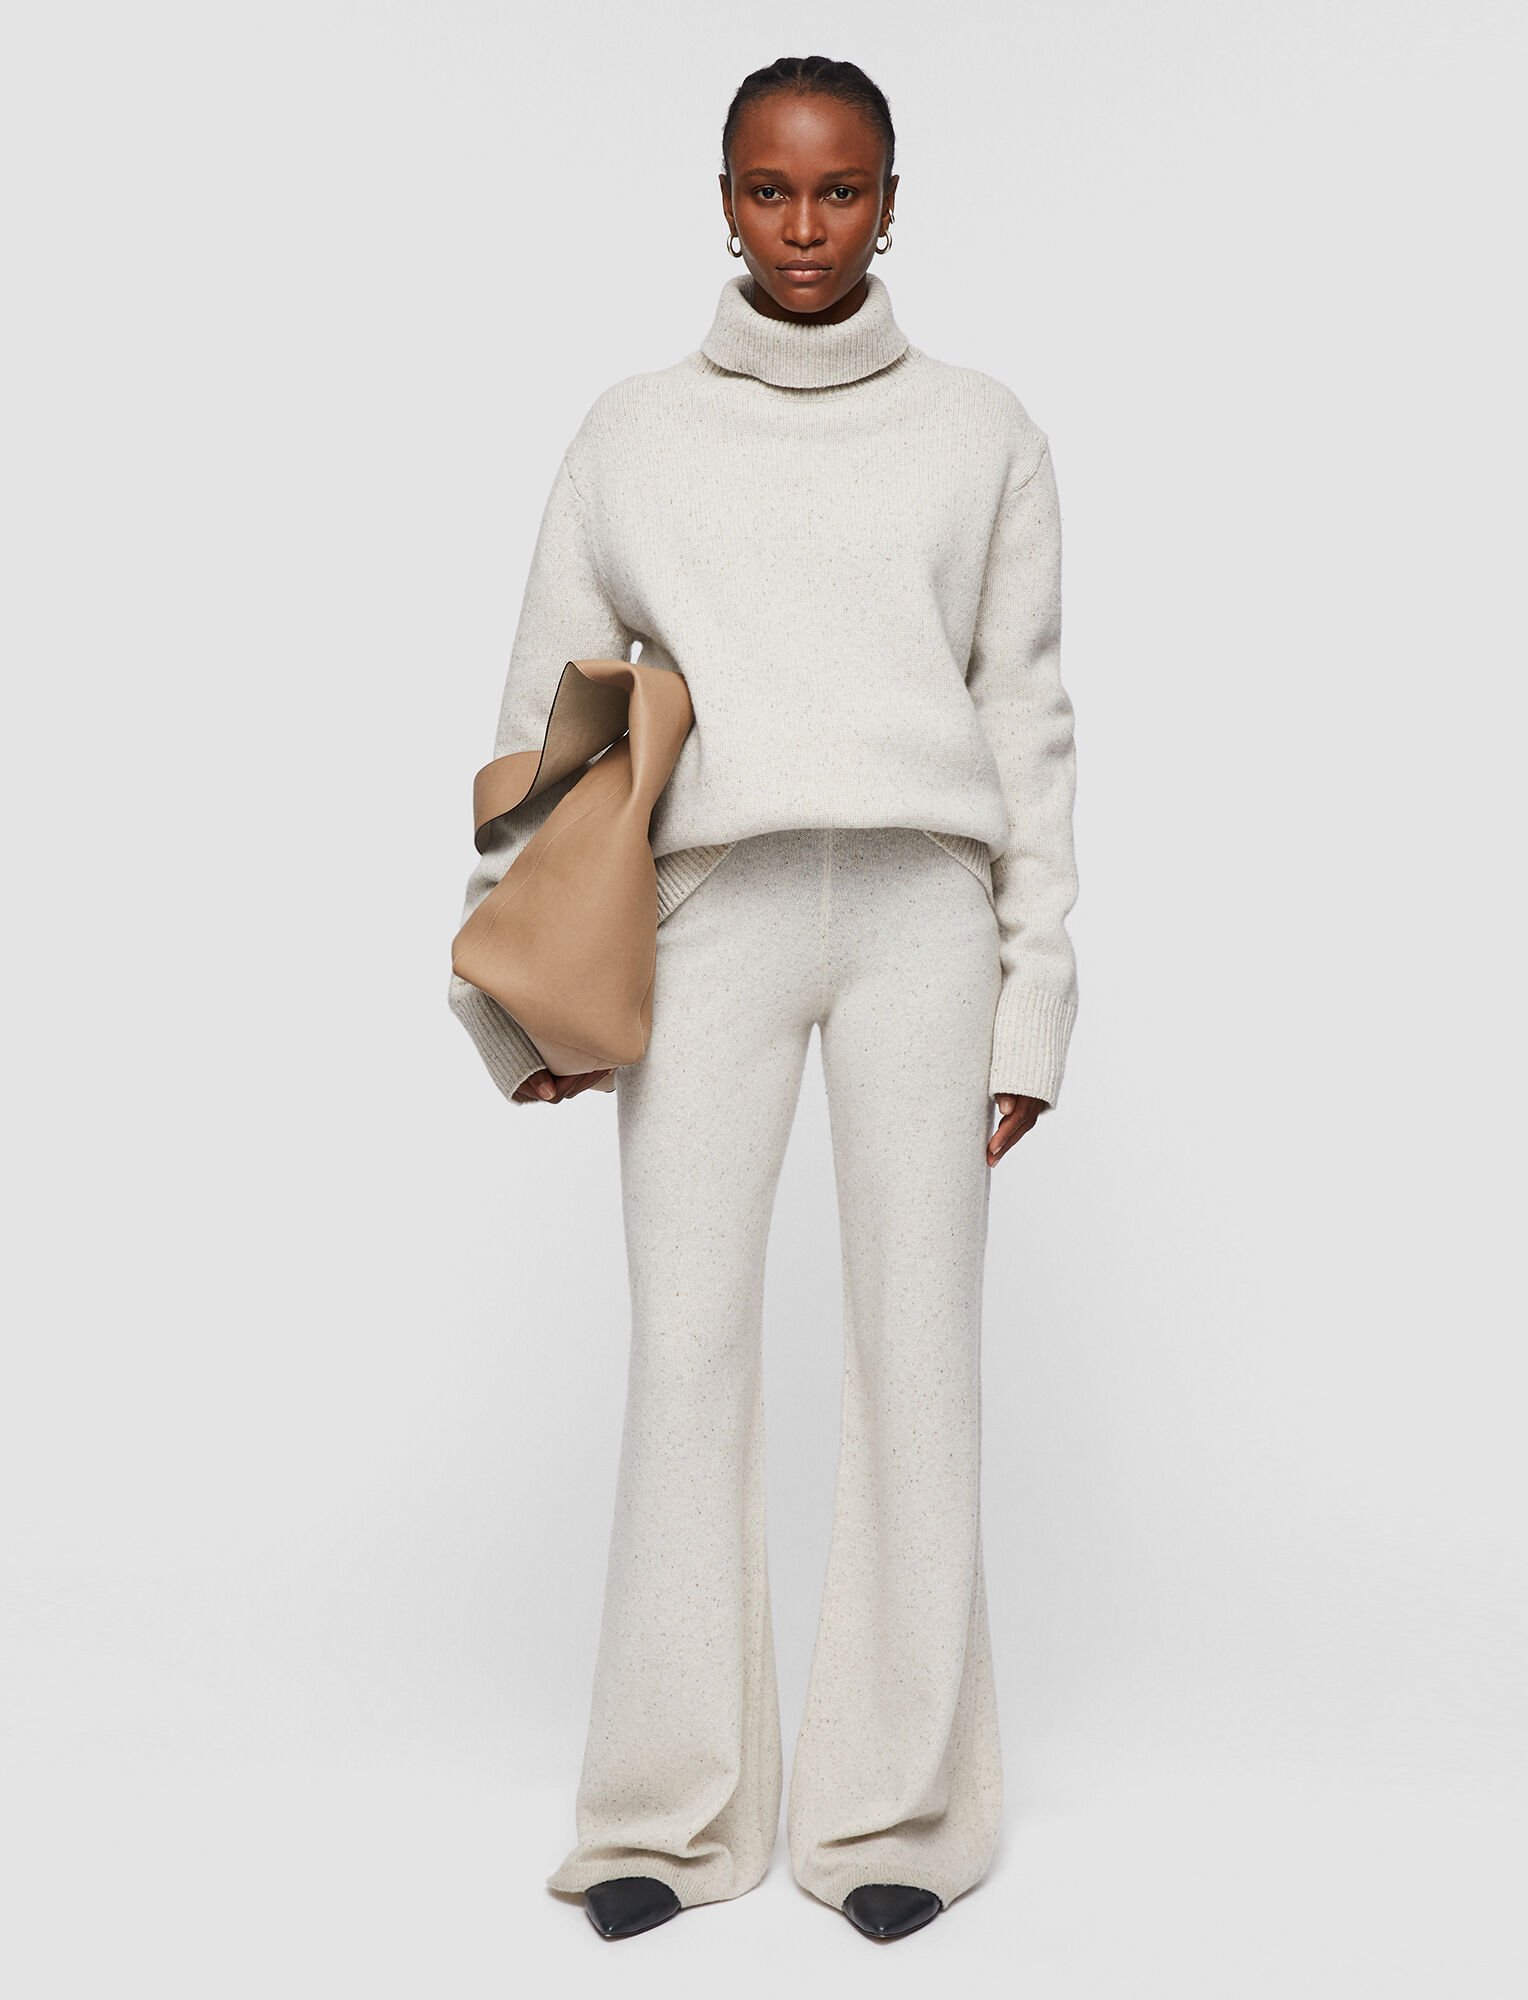 Joseph, Tweed Knit Trousers, in SANDSHELL